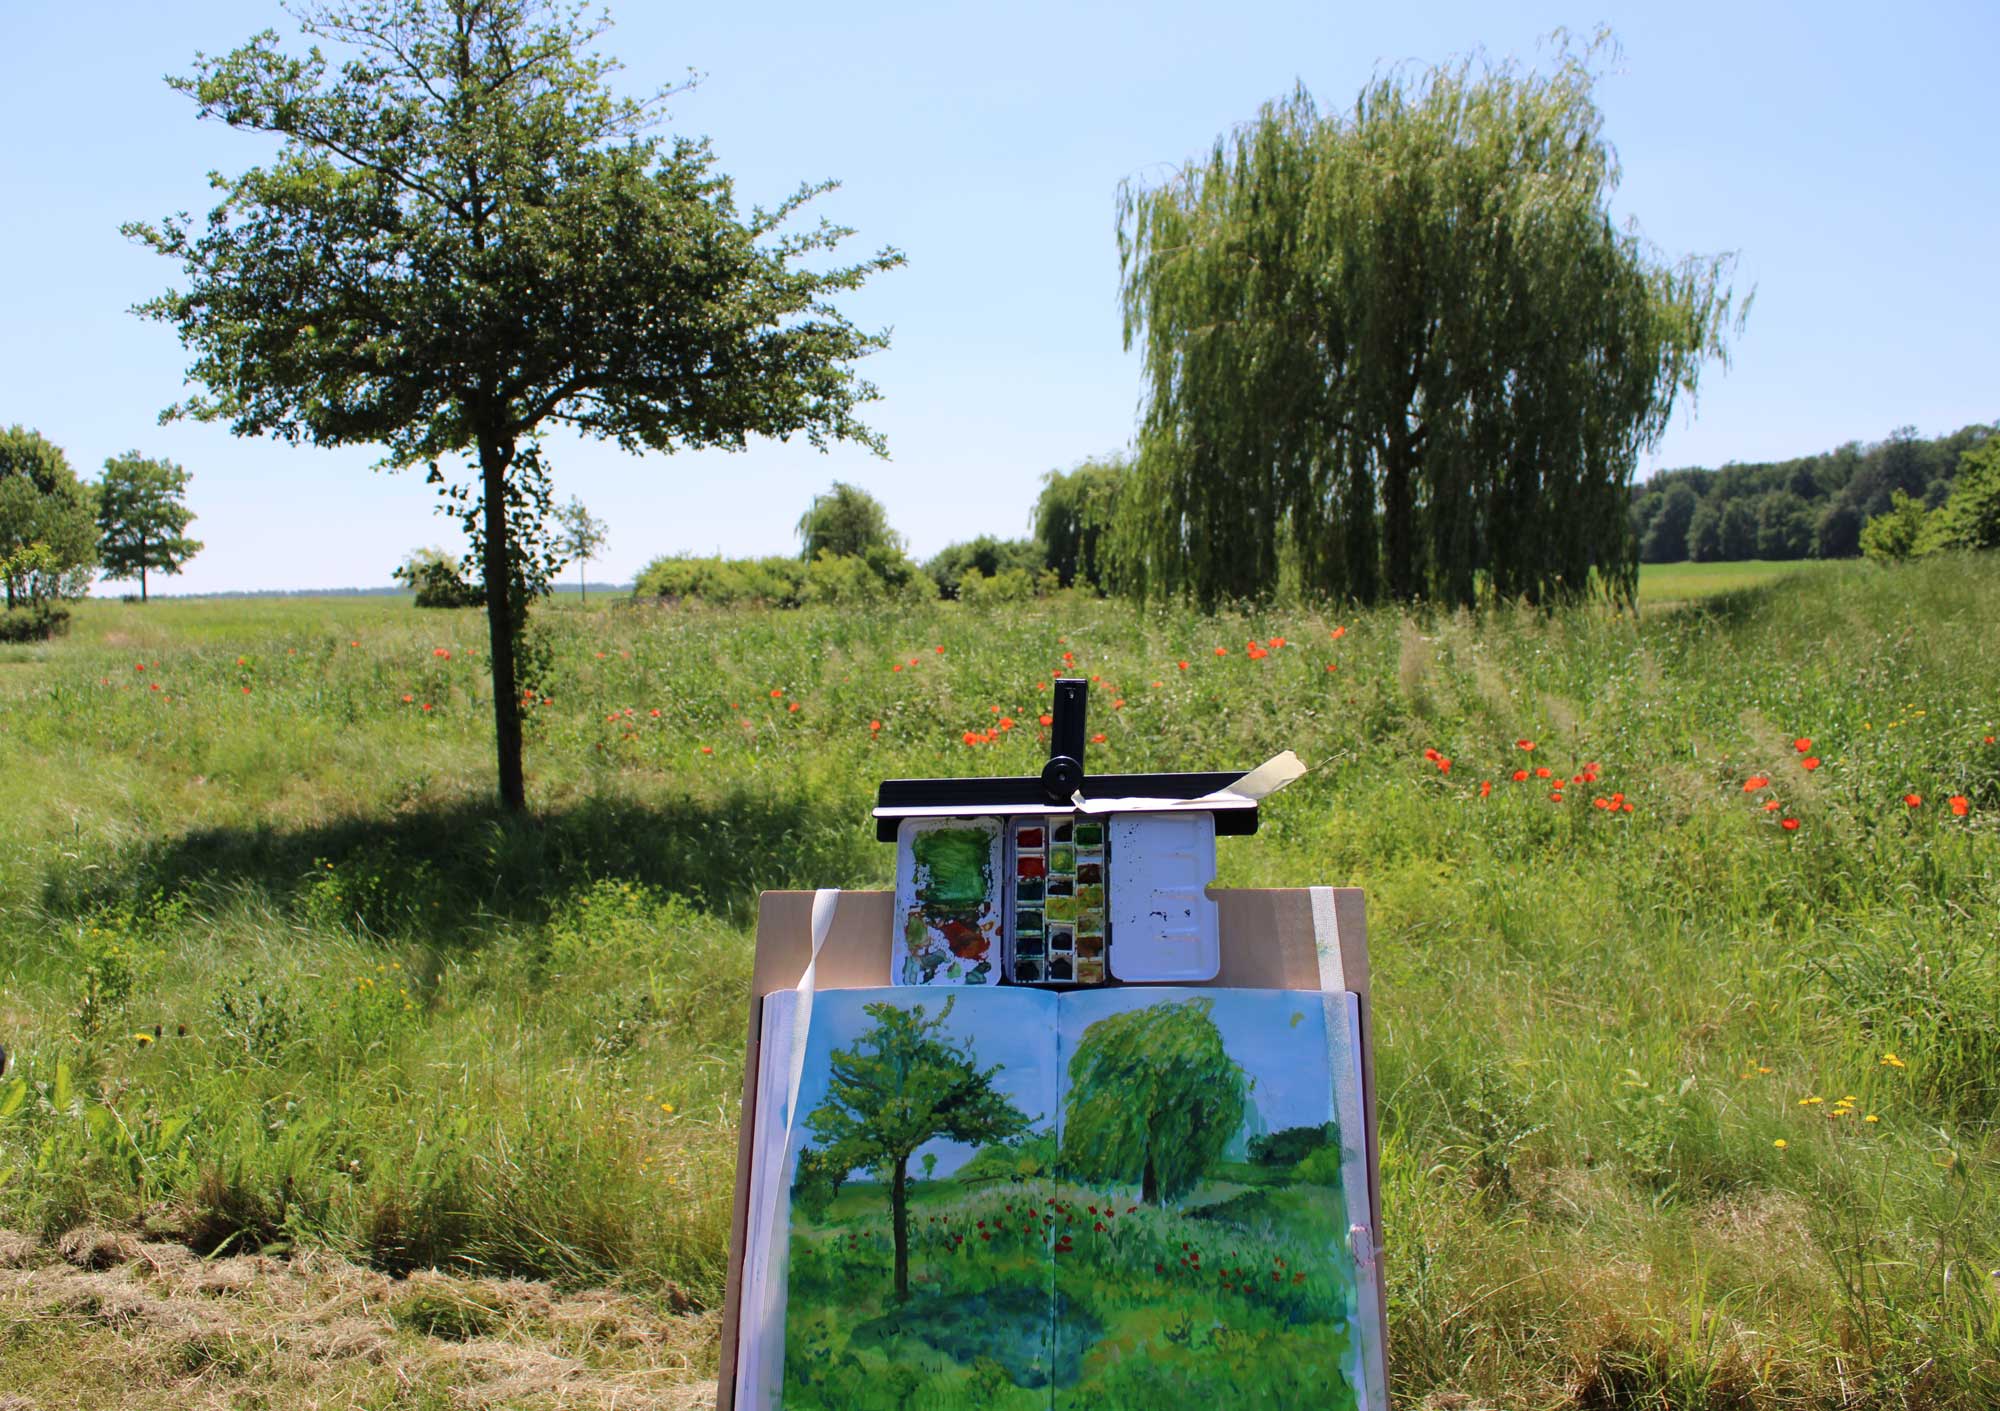 It's fun to get out and enjoy the bright blue sky and the green of the fields in a nearby park. Photo of my landscape painting in gouache with the scene that I've painted.